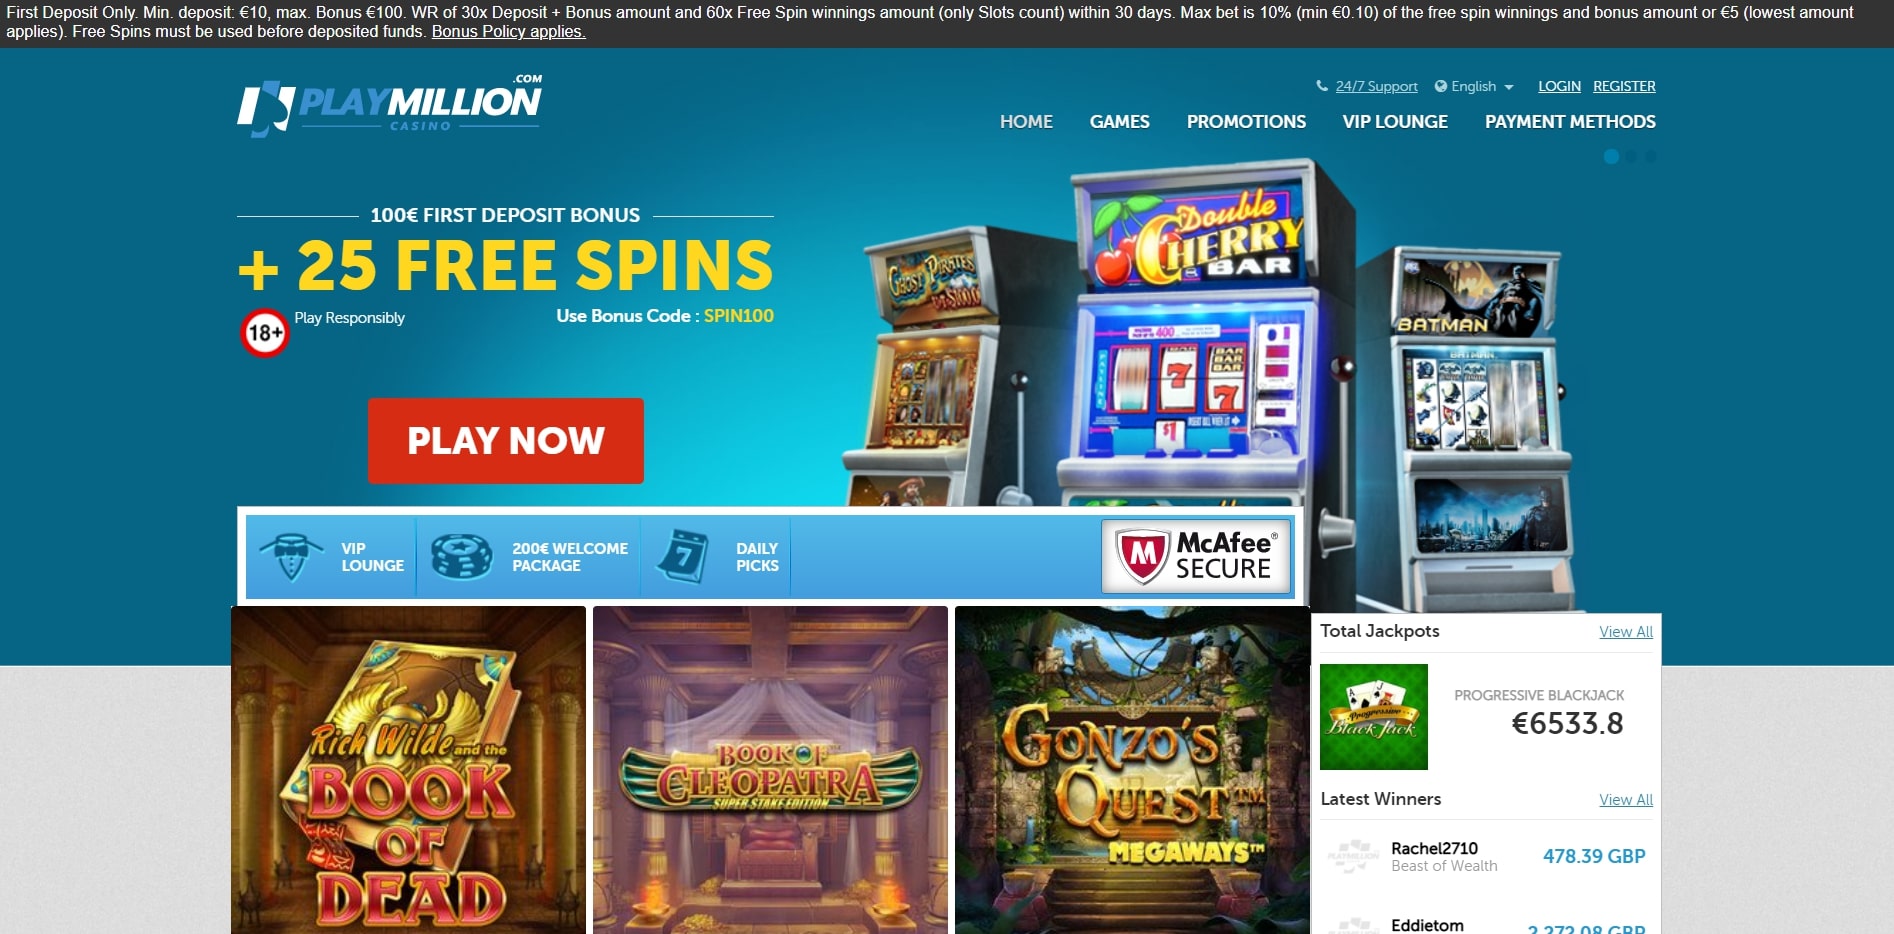 PlayMillion Casino Review